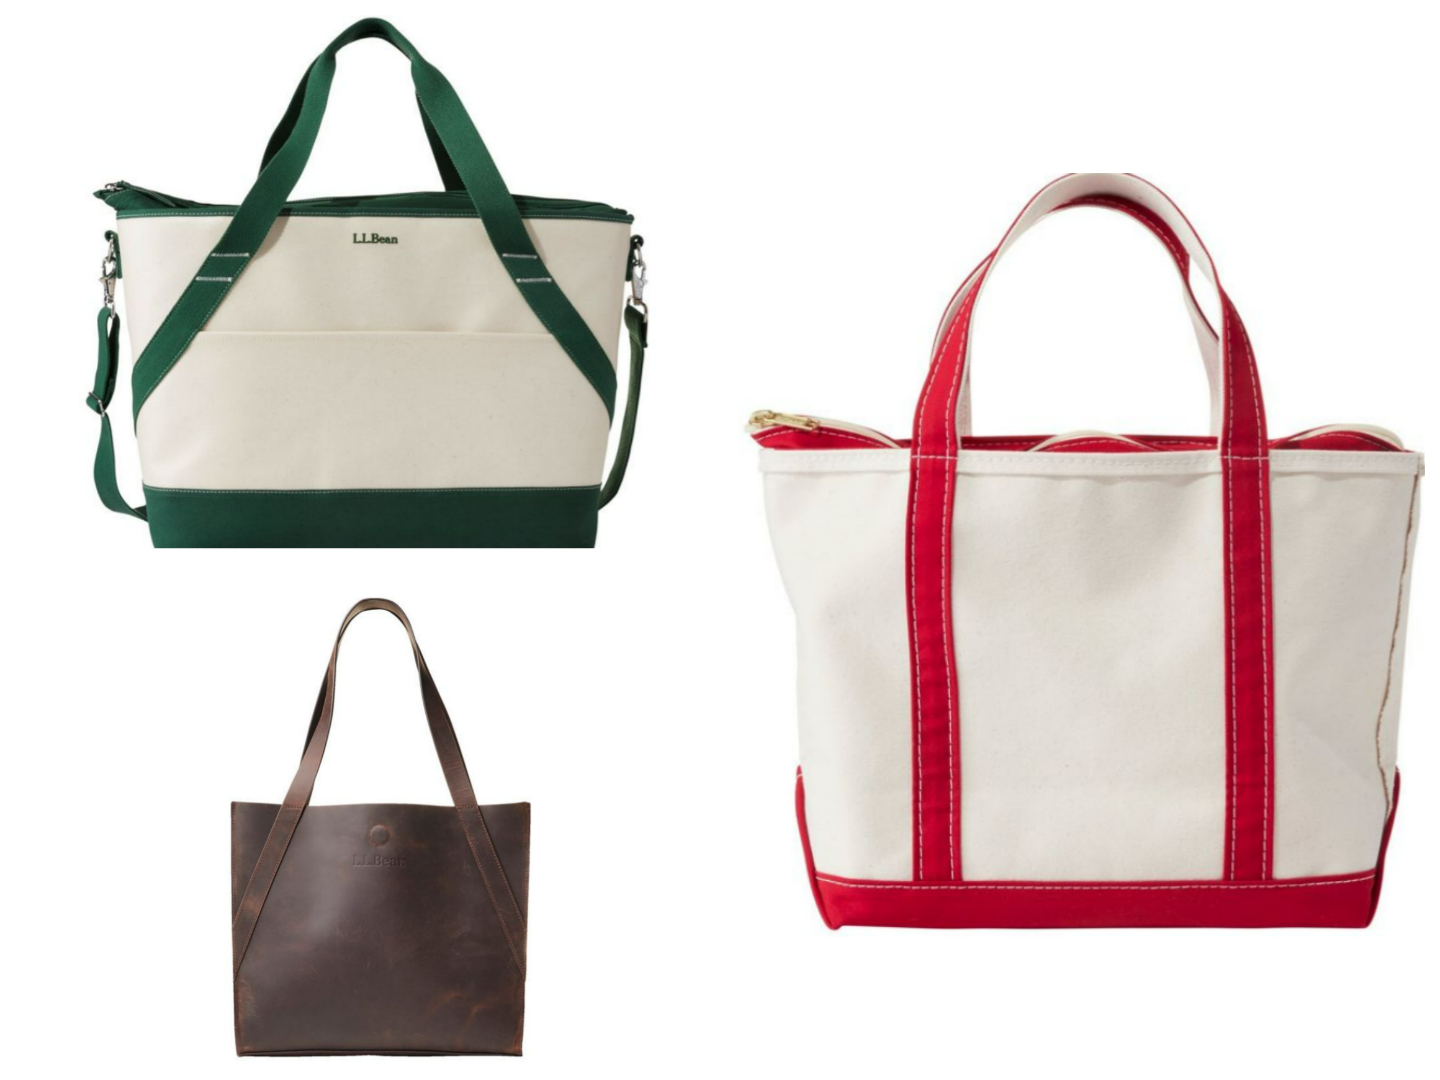 A History of 'It' Tote Bags: L.L. Bean, Hermès, Longchamp and More – WWD